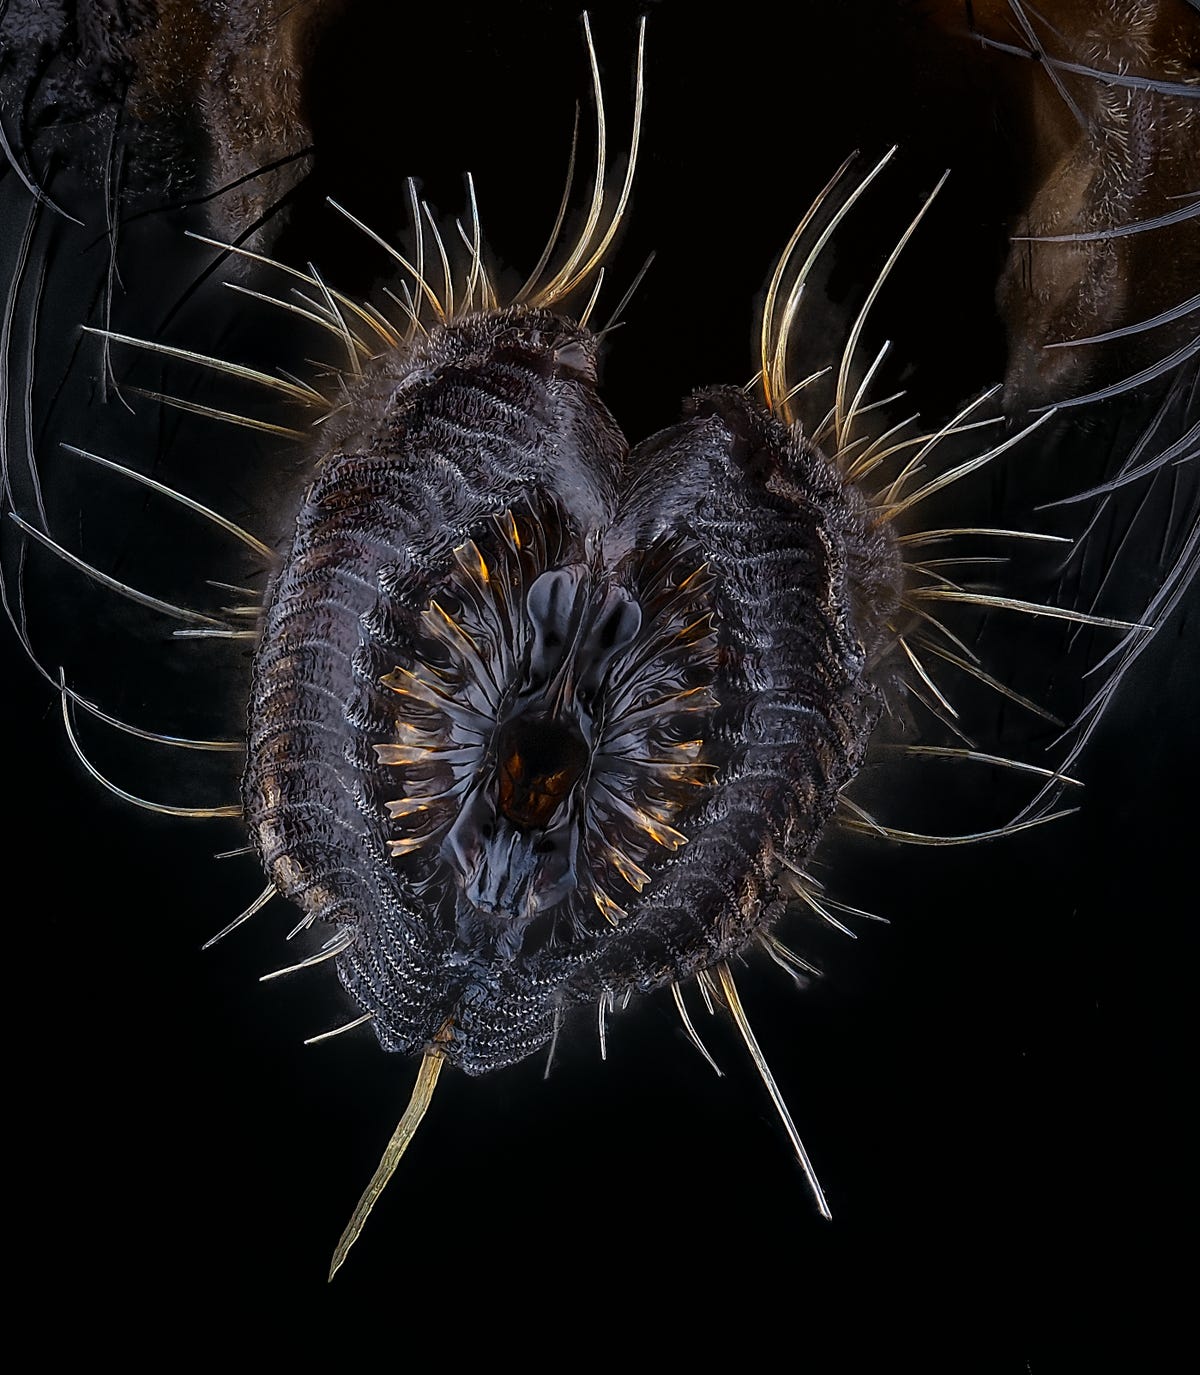 common housefly, magnified